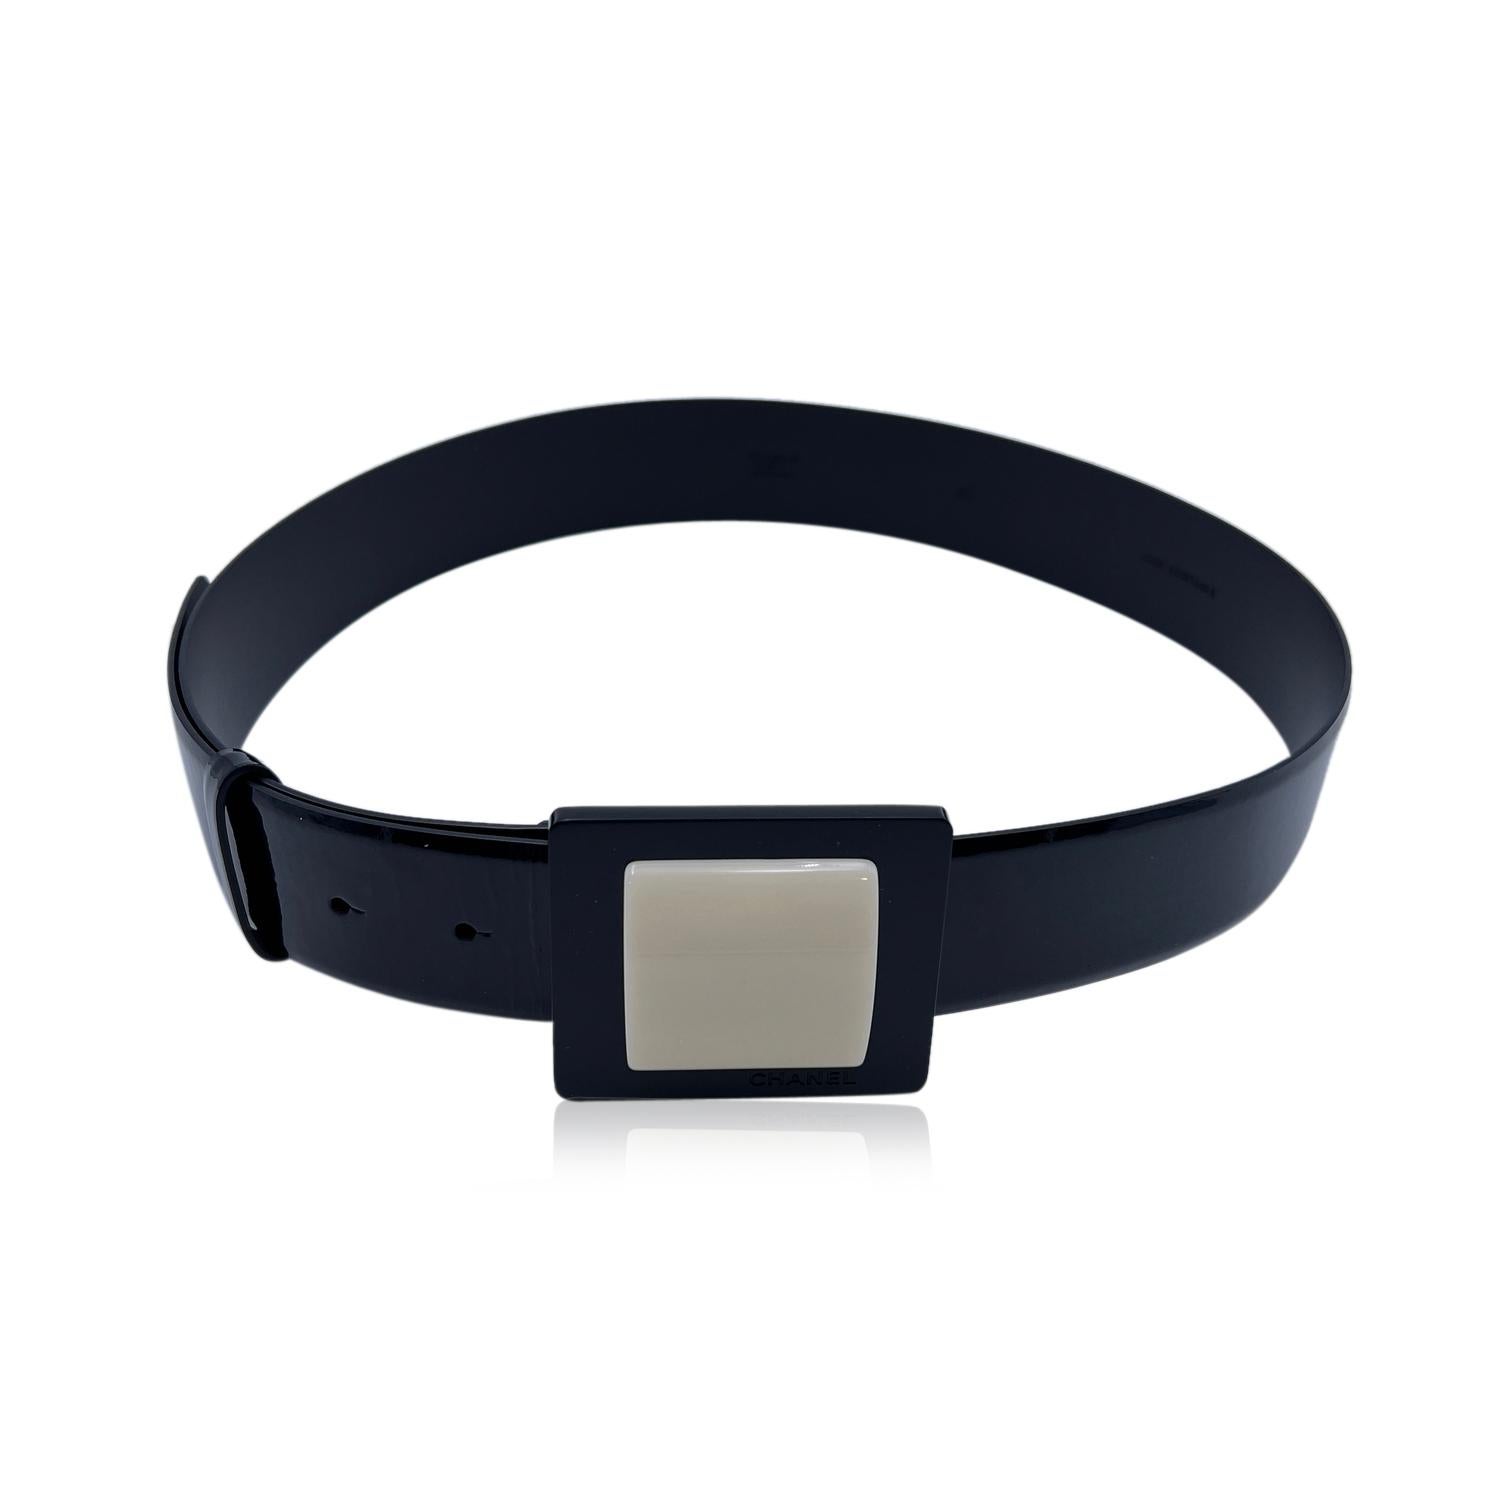 CHANEL black patent leather belt with white squared buckle. 'Chanel - 07 CC A - Made in Italy' engraved on the reverse of the belt. Size 40. Width: 1.6 inches - 4 cm. Total length of the strap: 36.5 inches - 91.5 cm. From buckle to first notch (max.